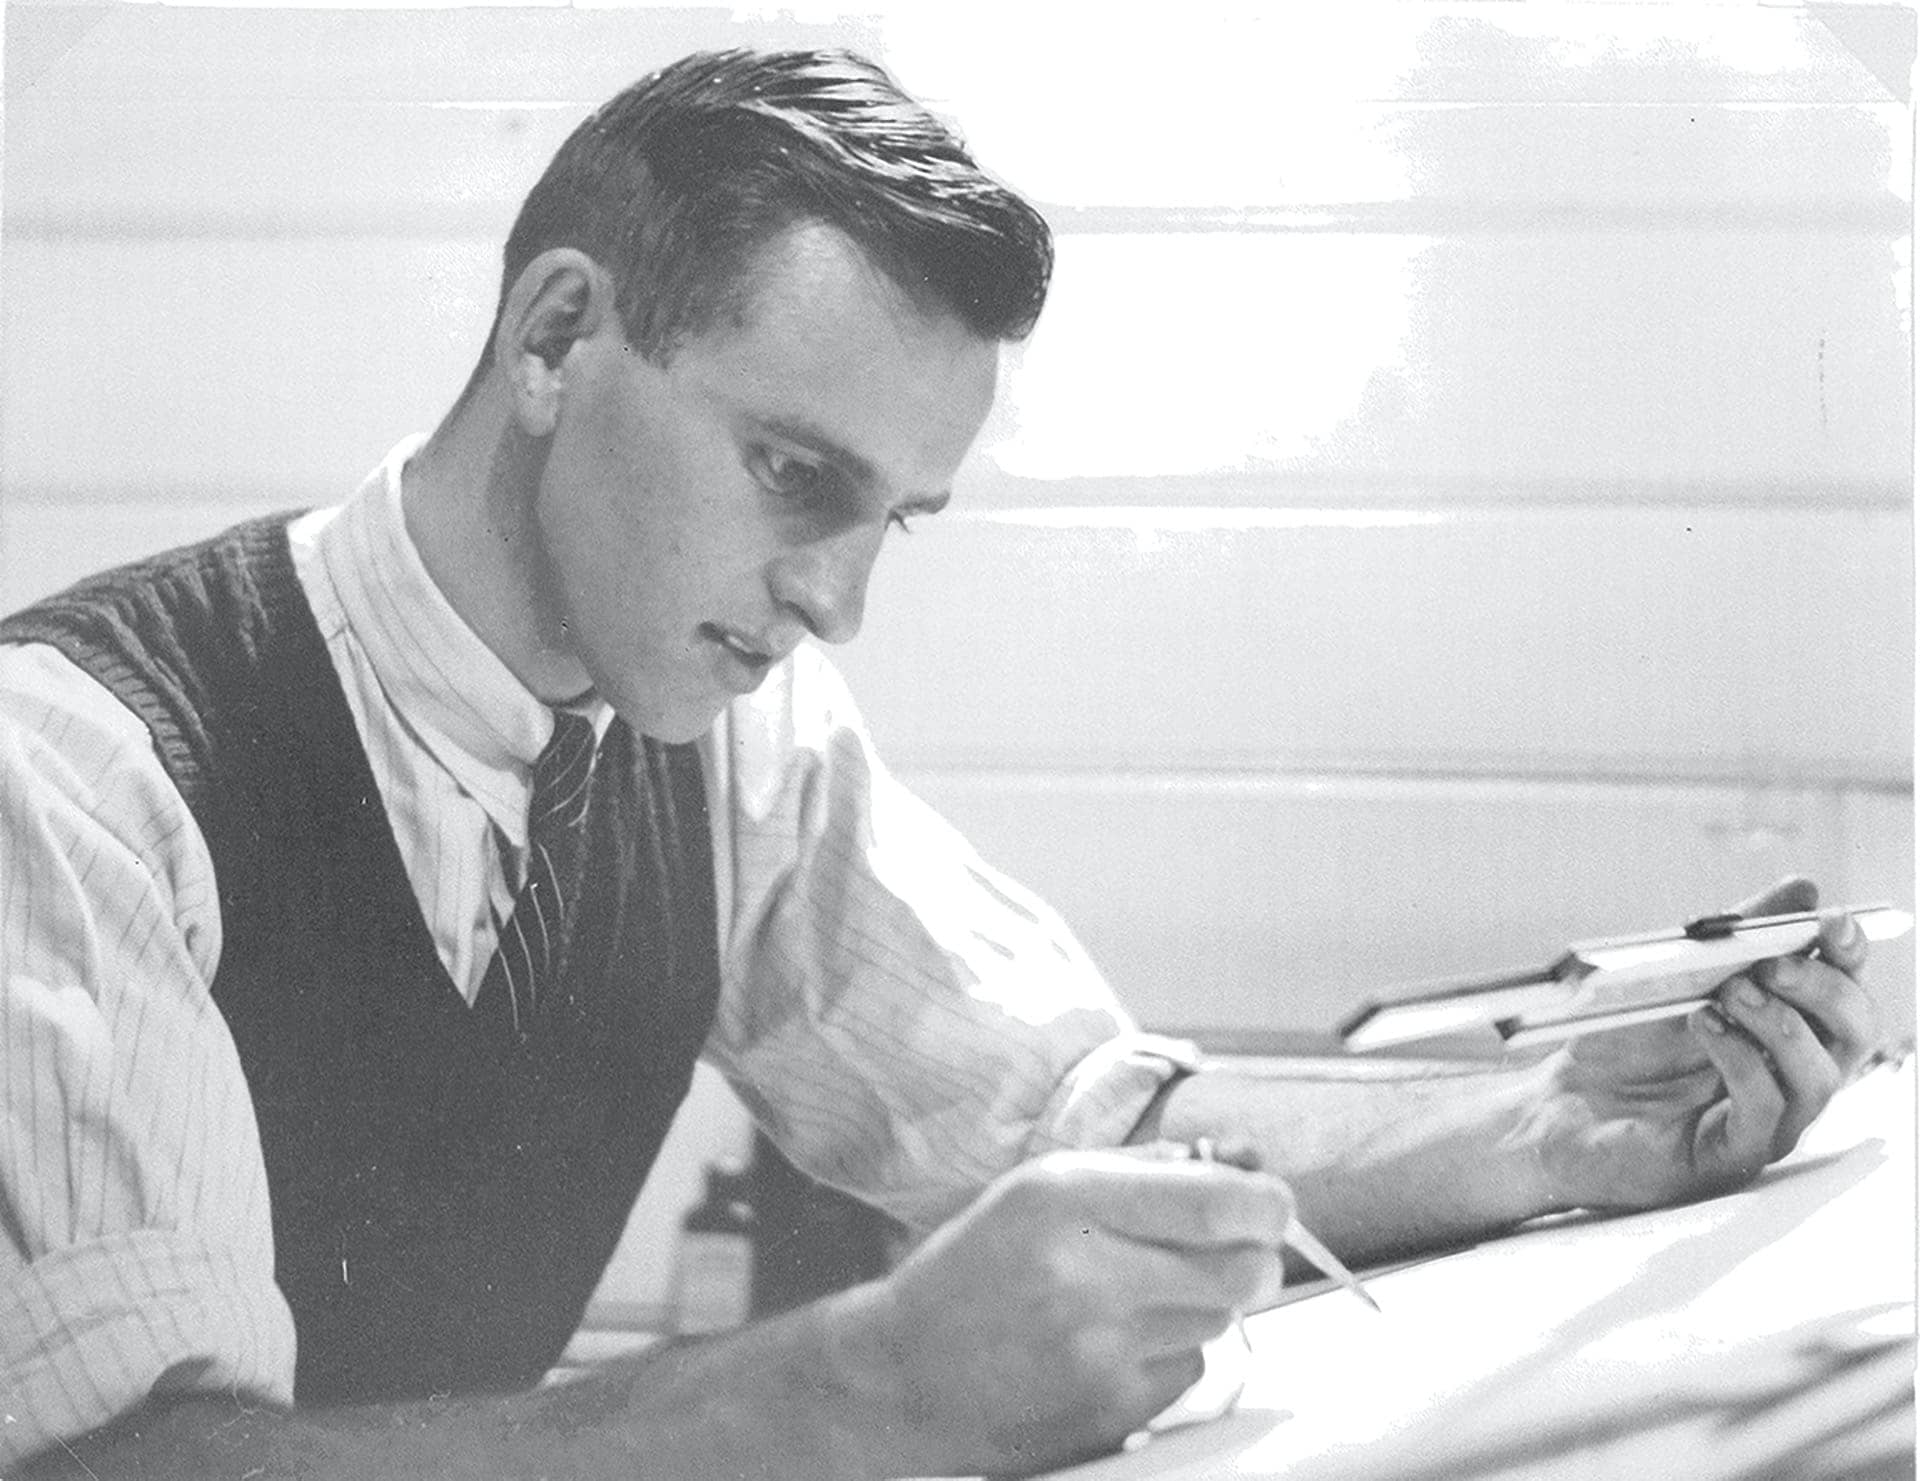 Old black and white photo of a man working on an architectural drawing